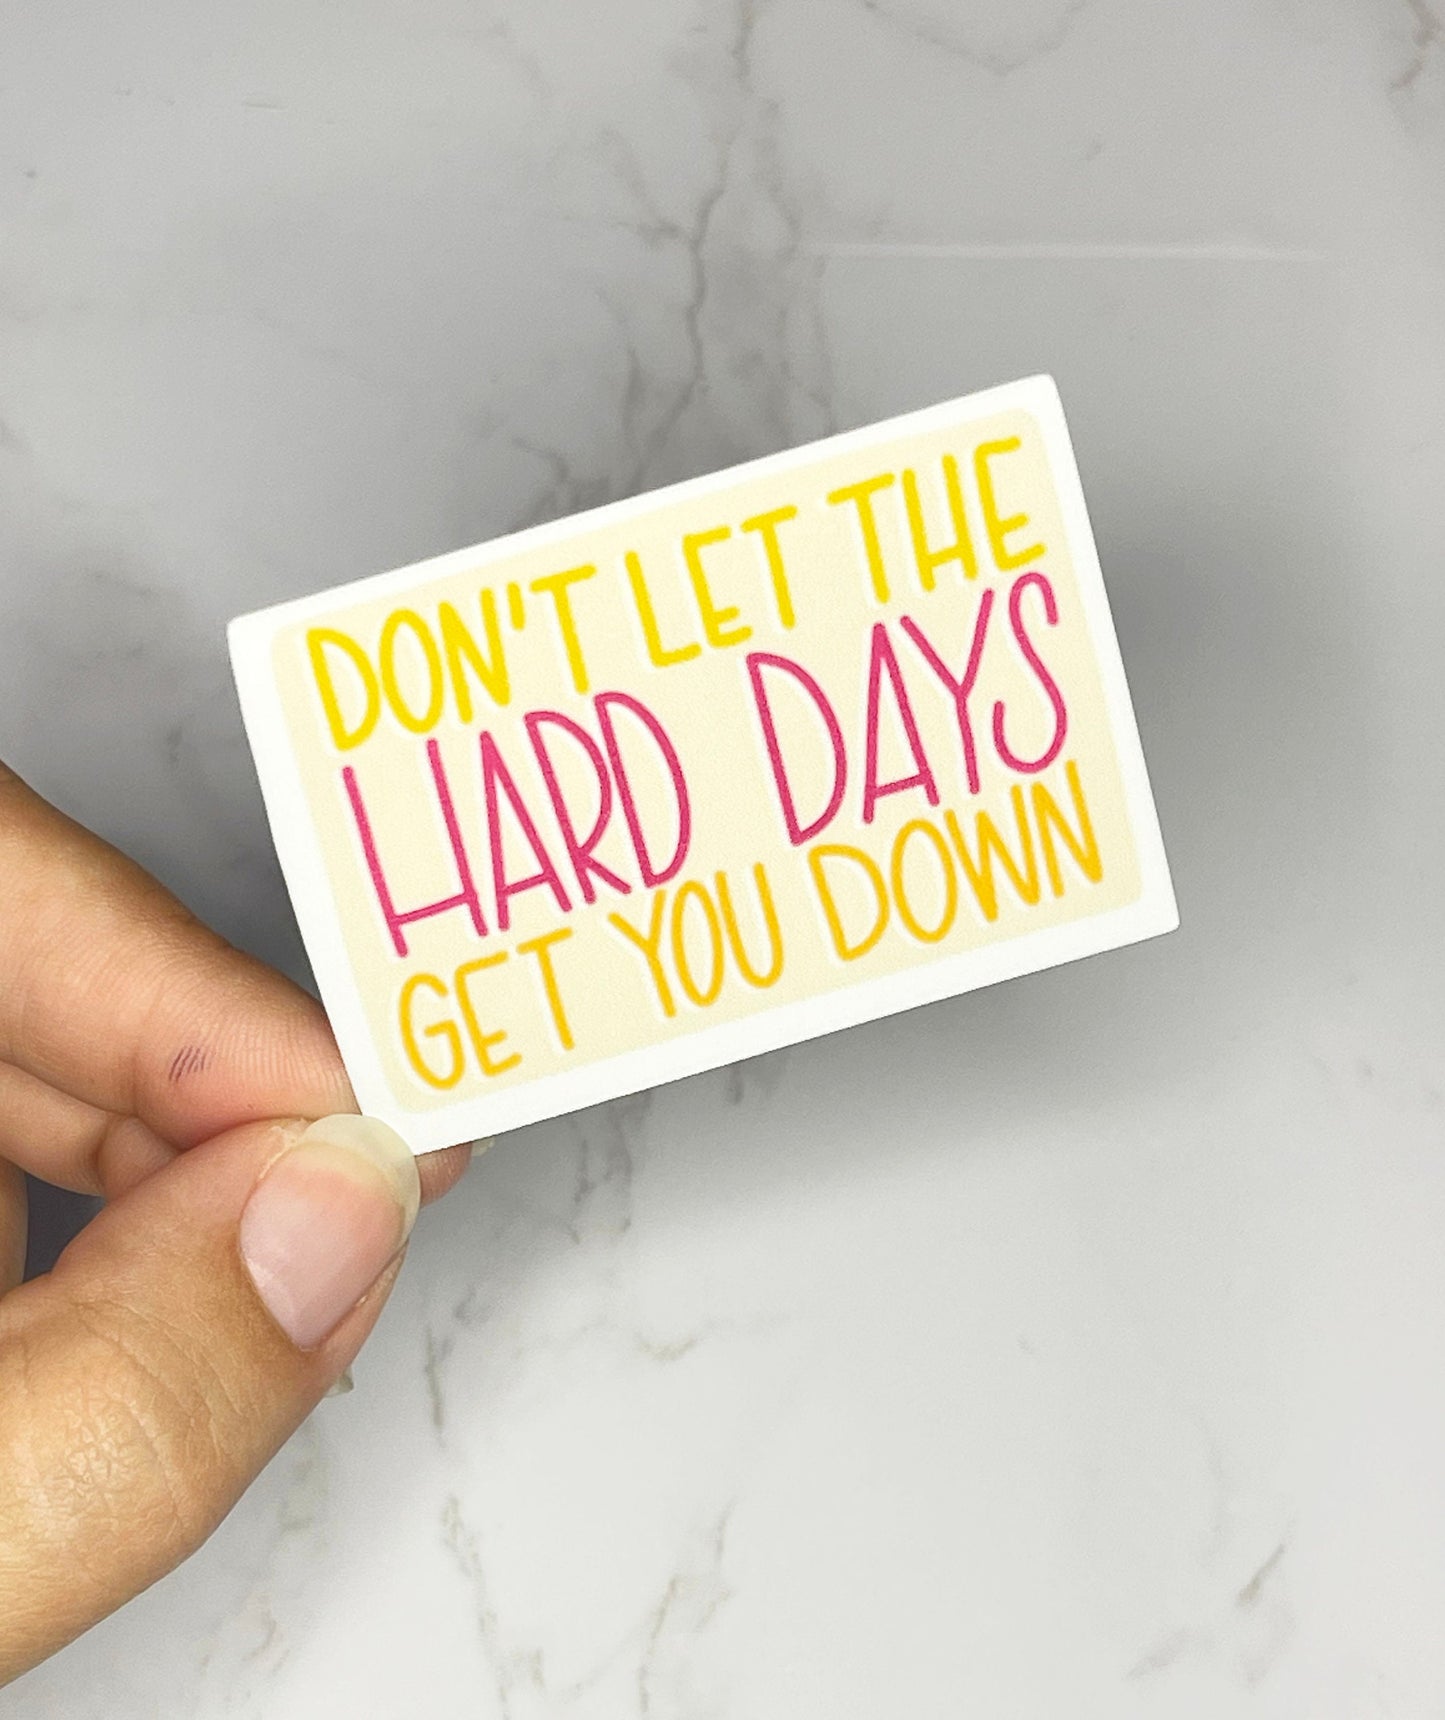 Don't Let the Hard Days Get You Down Sticker, Motivational Sticker, Fitness Inspiration Decal, Health and Wellness Sticker, Gift